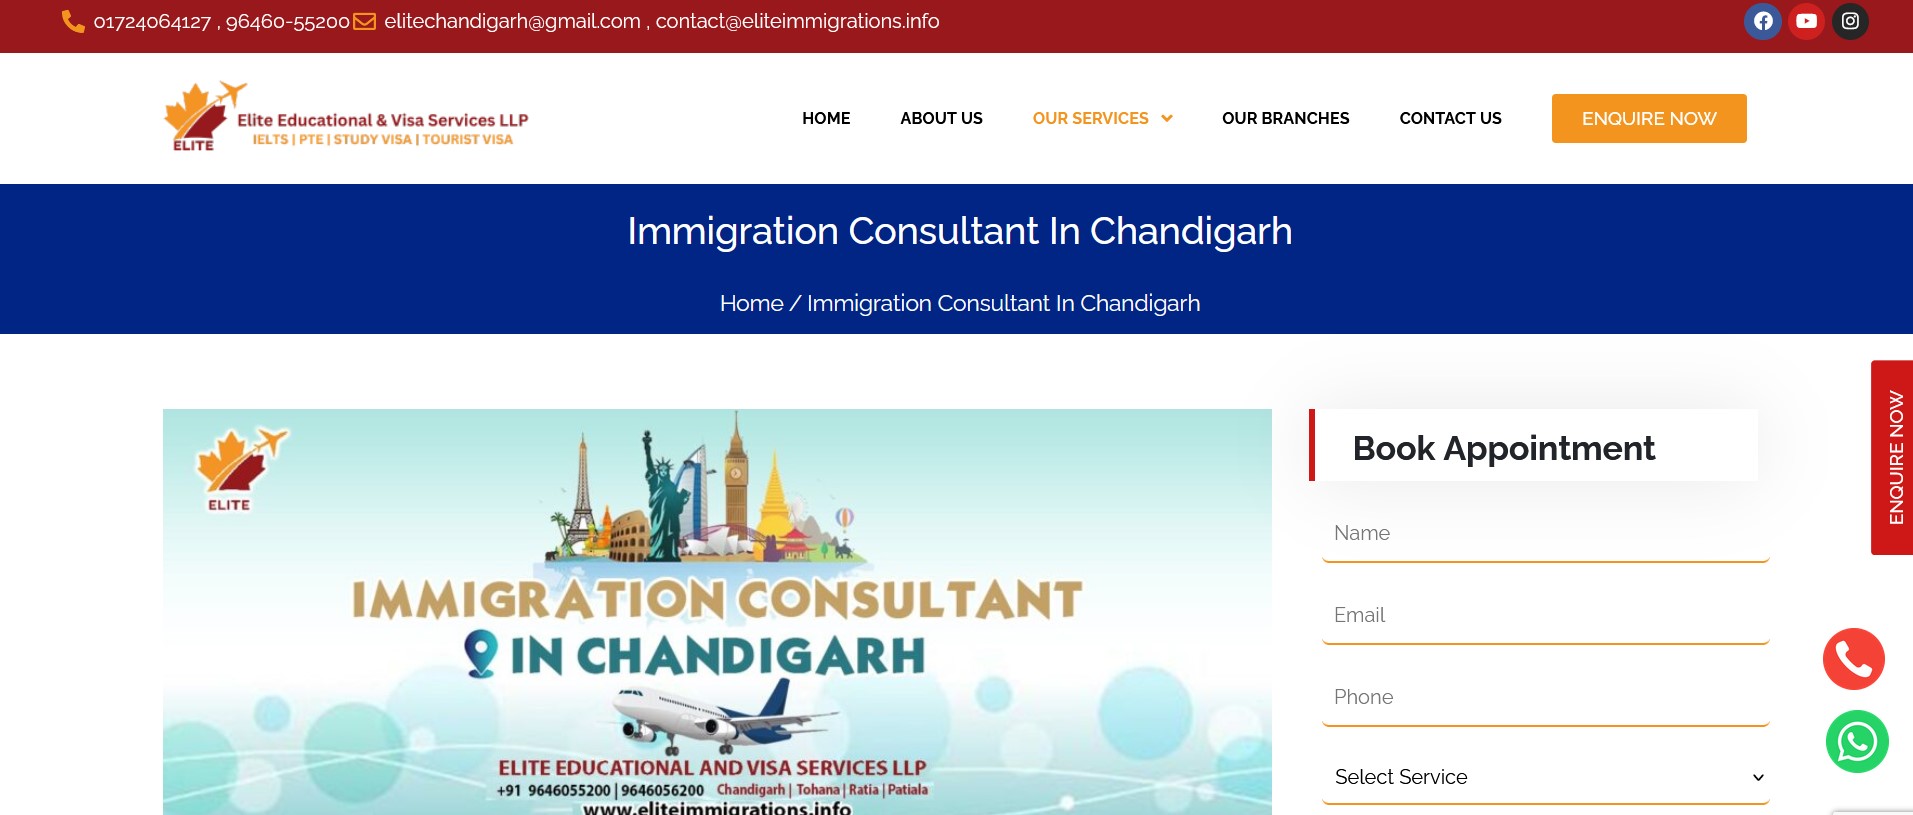 Why trust an immigration consultant for your visa process? - Webblogworld.com